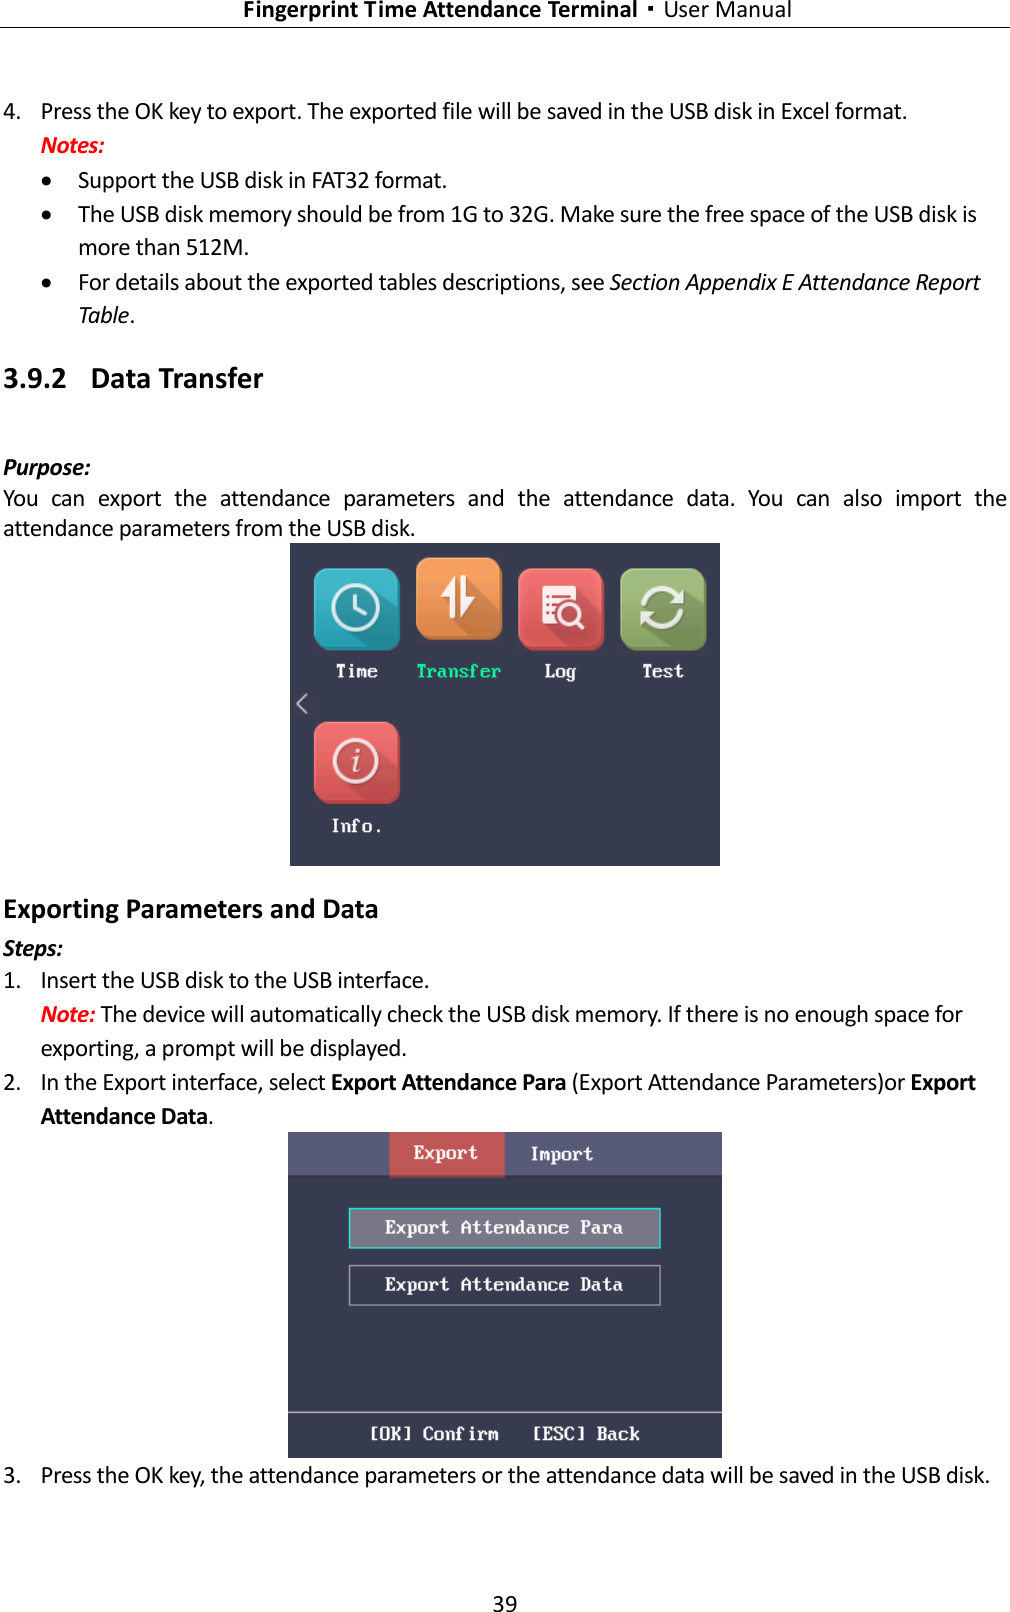   Fingerprint Time Attendance Terminal·User Manual 39  4. Press the OK key to export. The exported file will be saved in the USB disk in Excel format. Notes:  Support the USB disk in FAT32 format.  The USB disk memory should be from 1G to 32G. Make sure the free space of the USB disk is more than 512M.  For details about the exported tables descriptions, see Section Appendix E Attendance Report Table. 3.9.2 Data Transfer Purpose: You  can  export  the  attendance  parameters  and  the  attendance  data.  You  can  also  import  the attendance parameters from the USB disk.  Exporting Parameters and Data Steps: 1. Insert the USB disk to the USB interface. Note: The device will automatically check the USB disk memory. If there is no enough space for exporting, a prompt will be displayed. 2. In the Export interface, select Export Attendance Para (Export Attendance Parameters)or Export Attendance Data.  3. Press the OK key, the attendance parameters or the attendance data will be saved in the USB disk. 